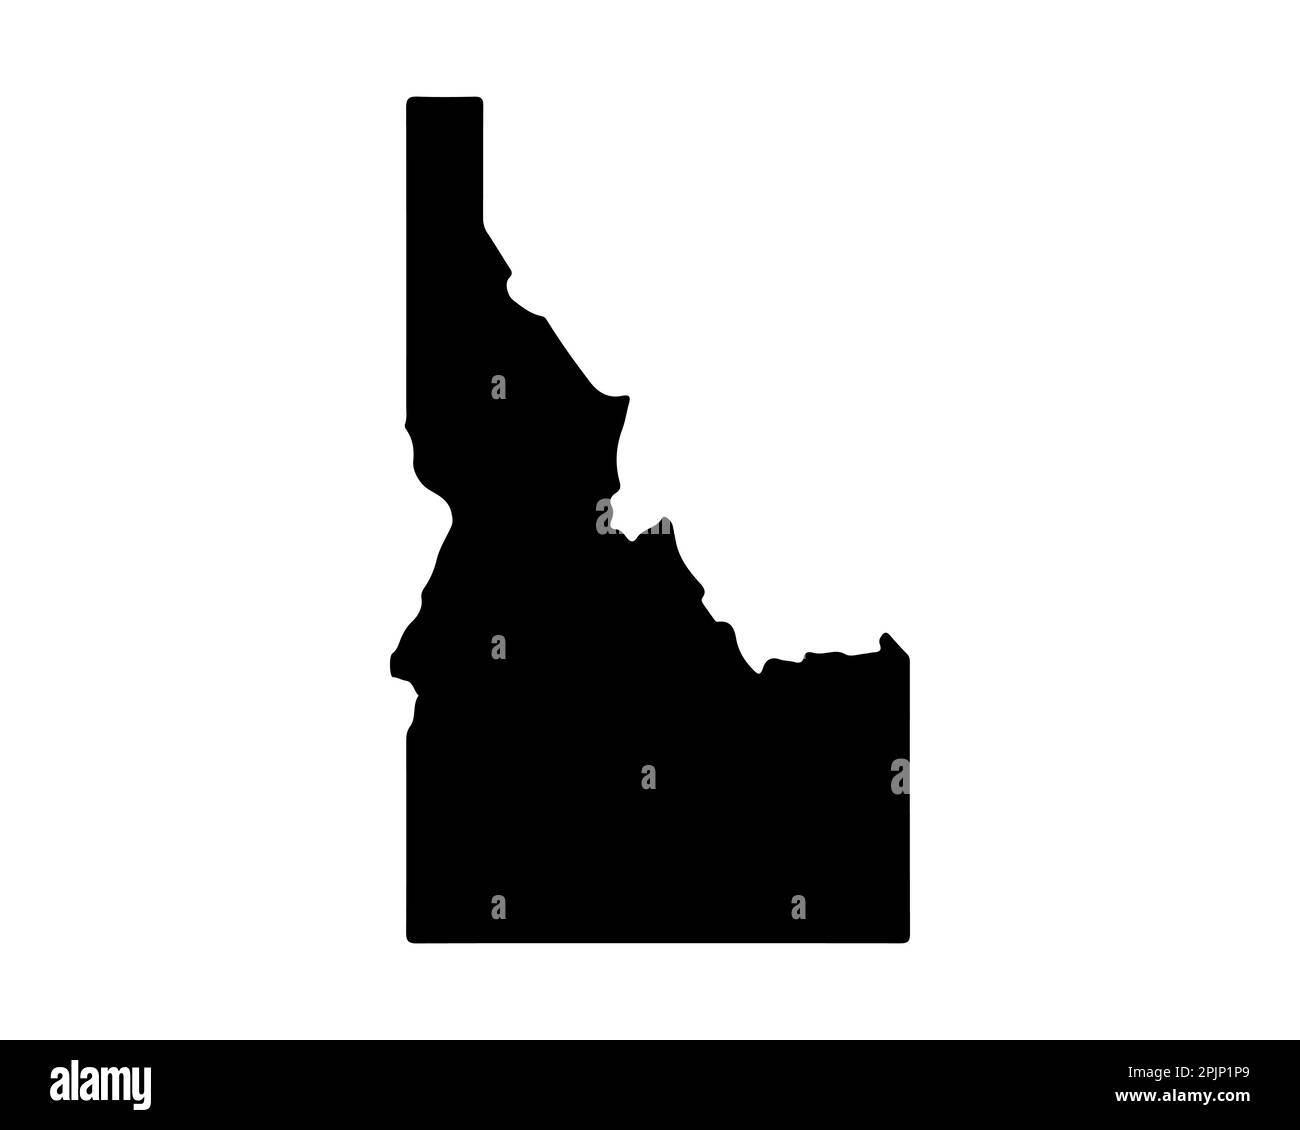 Idaho state map. US state map. Idaho silhouette symbol. Vector illustration Stock Vector